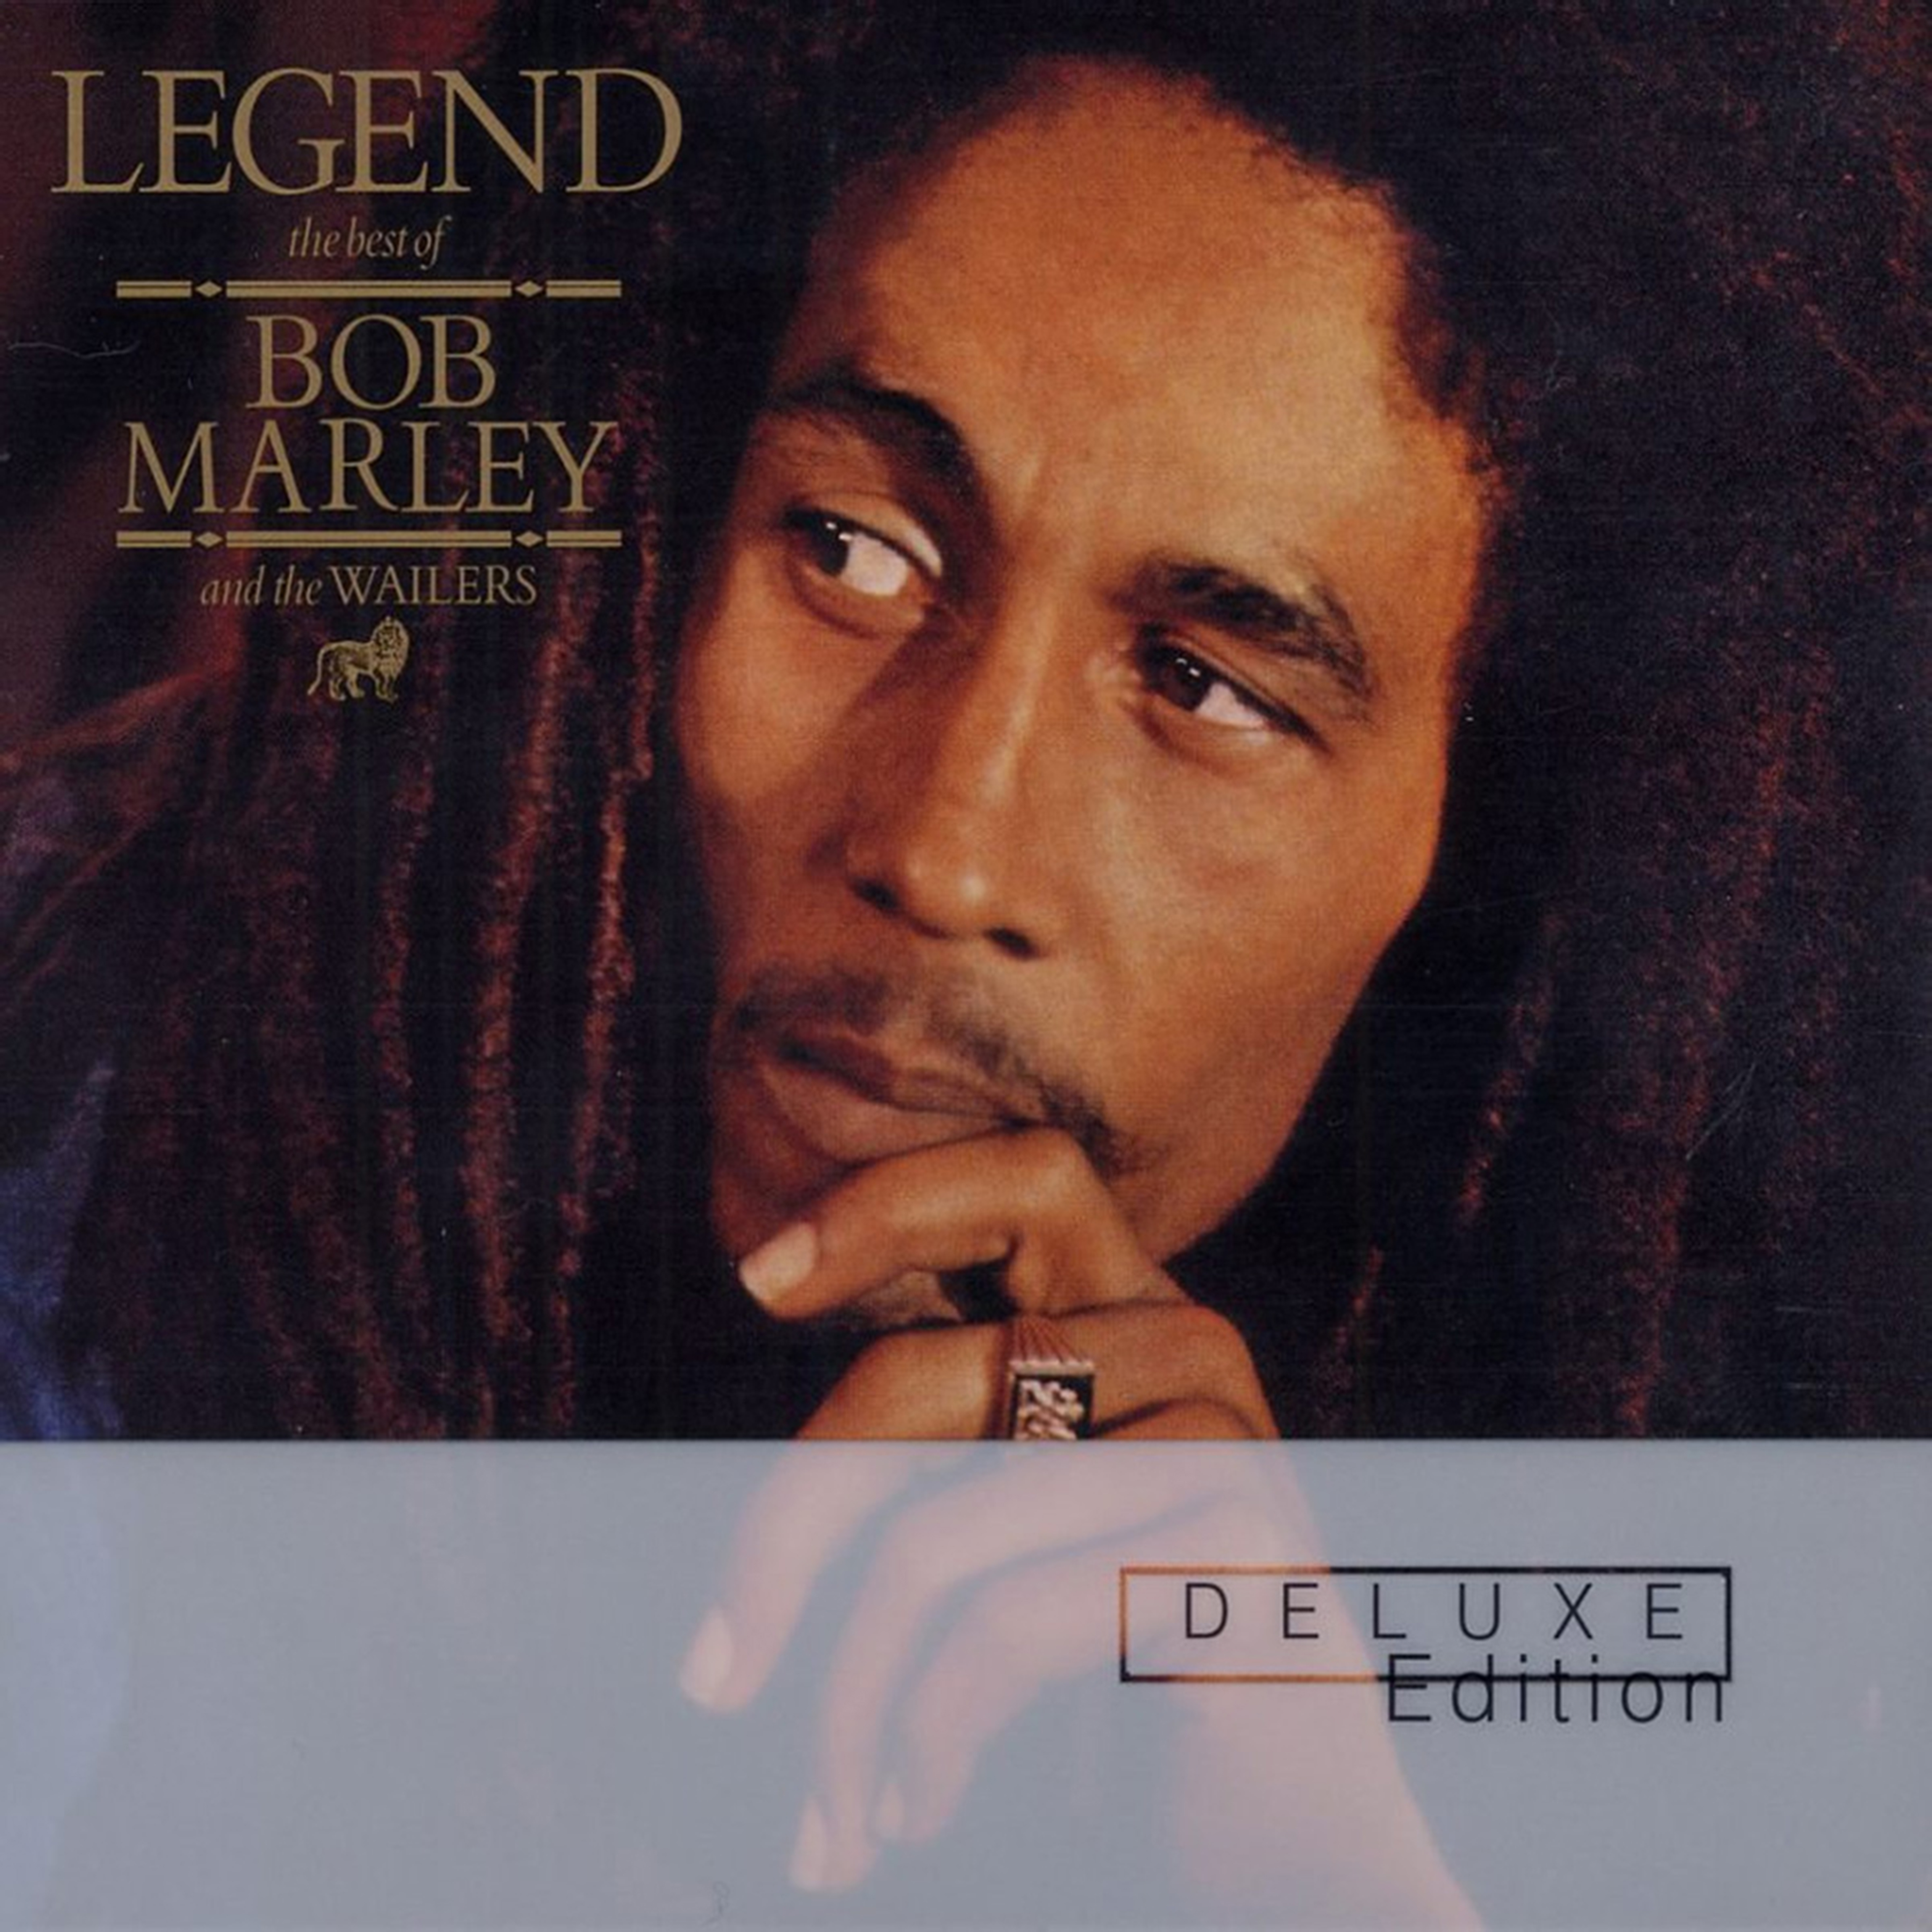 Bob-Marley The Wailers Legend Deluxe-Edition